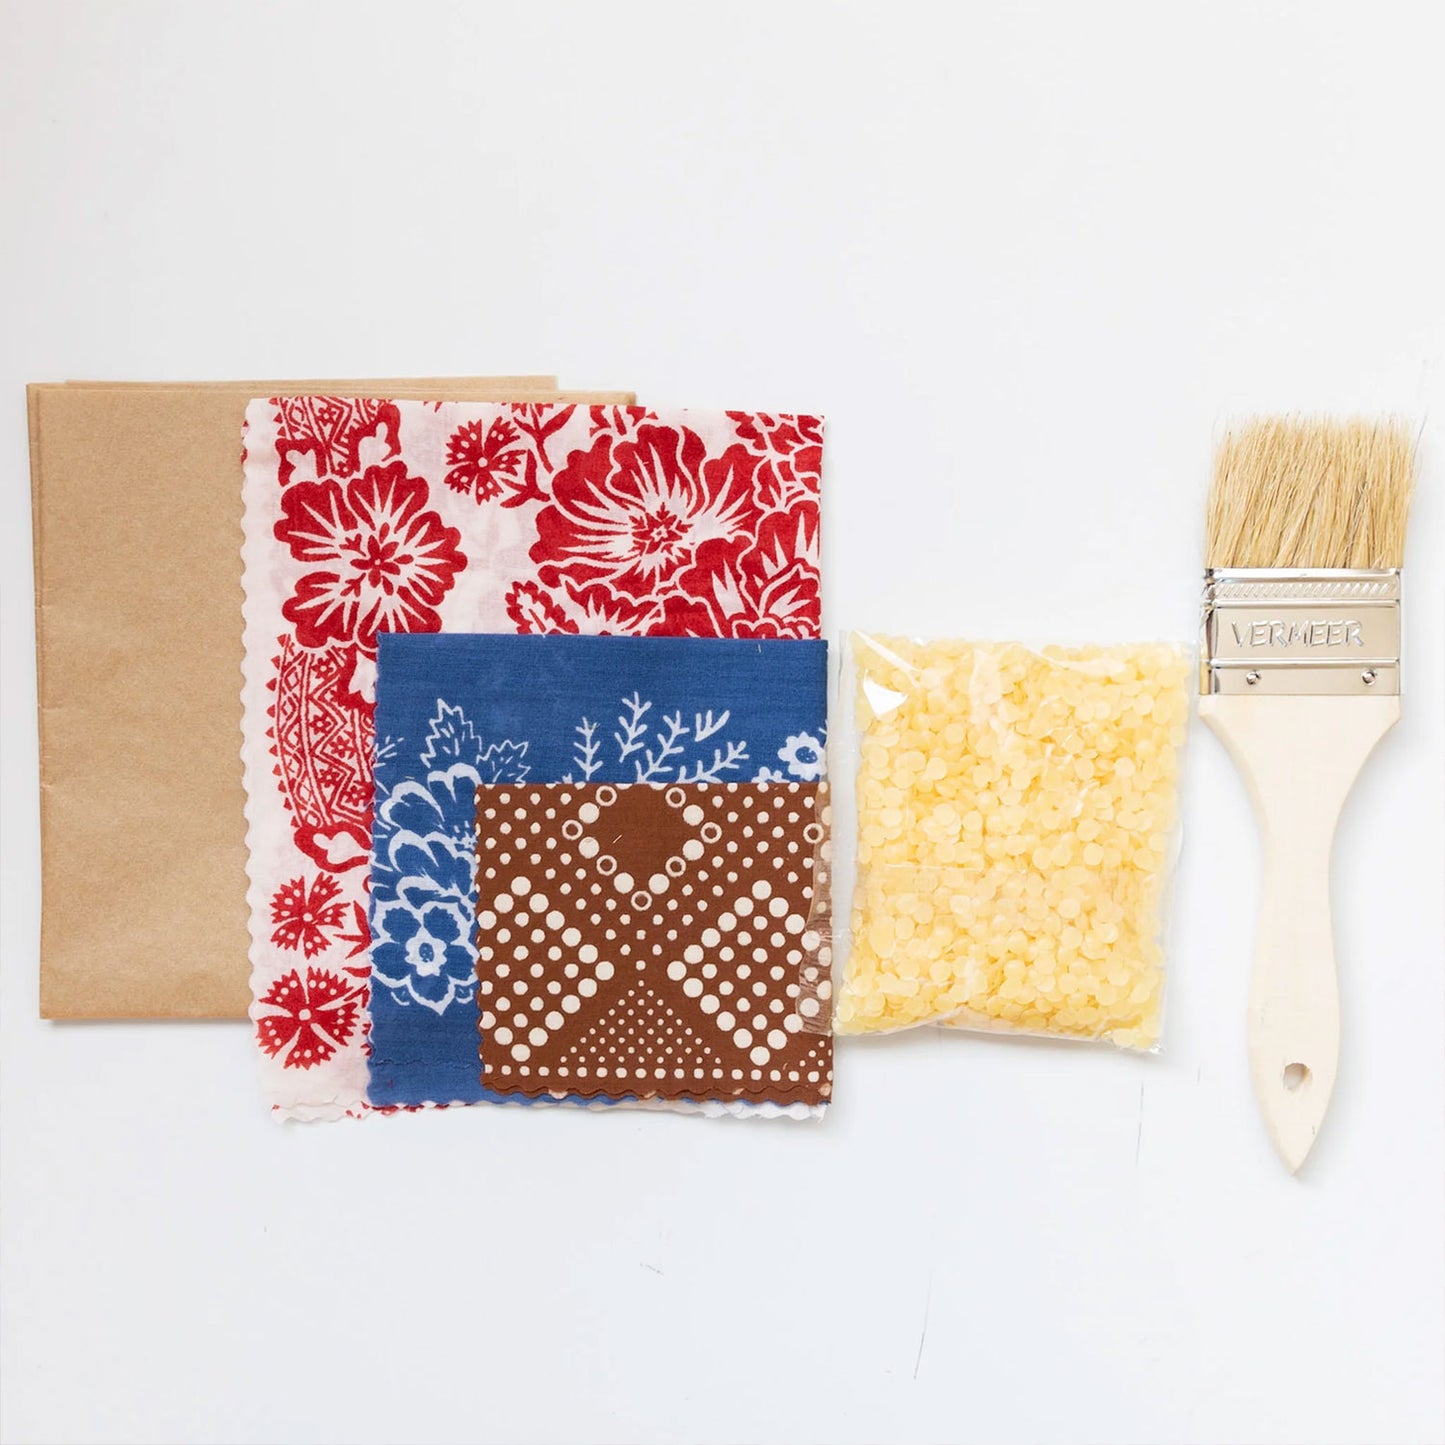 Beeswax Food Wrap Kit by Last Chance Textiles